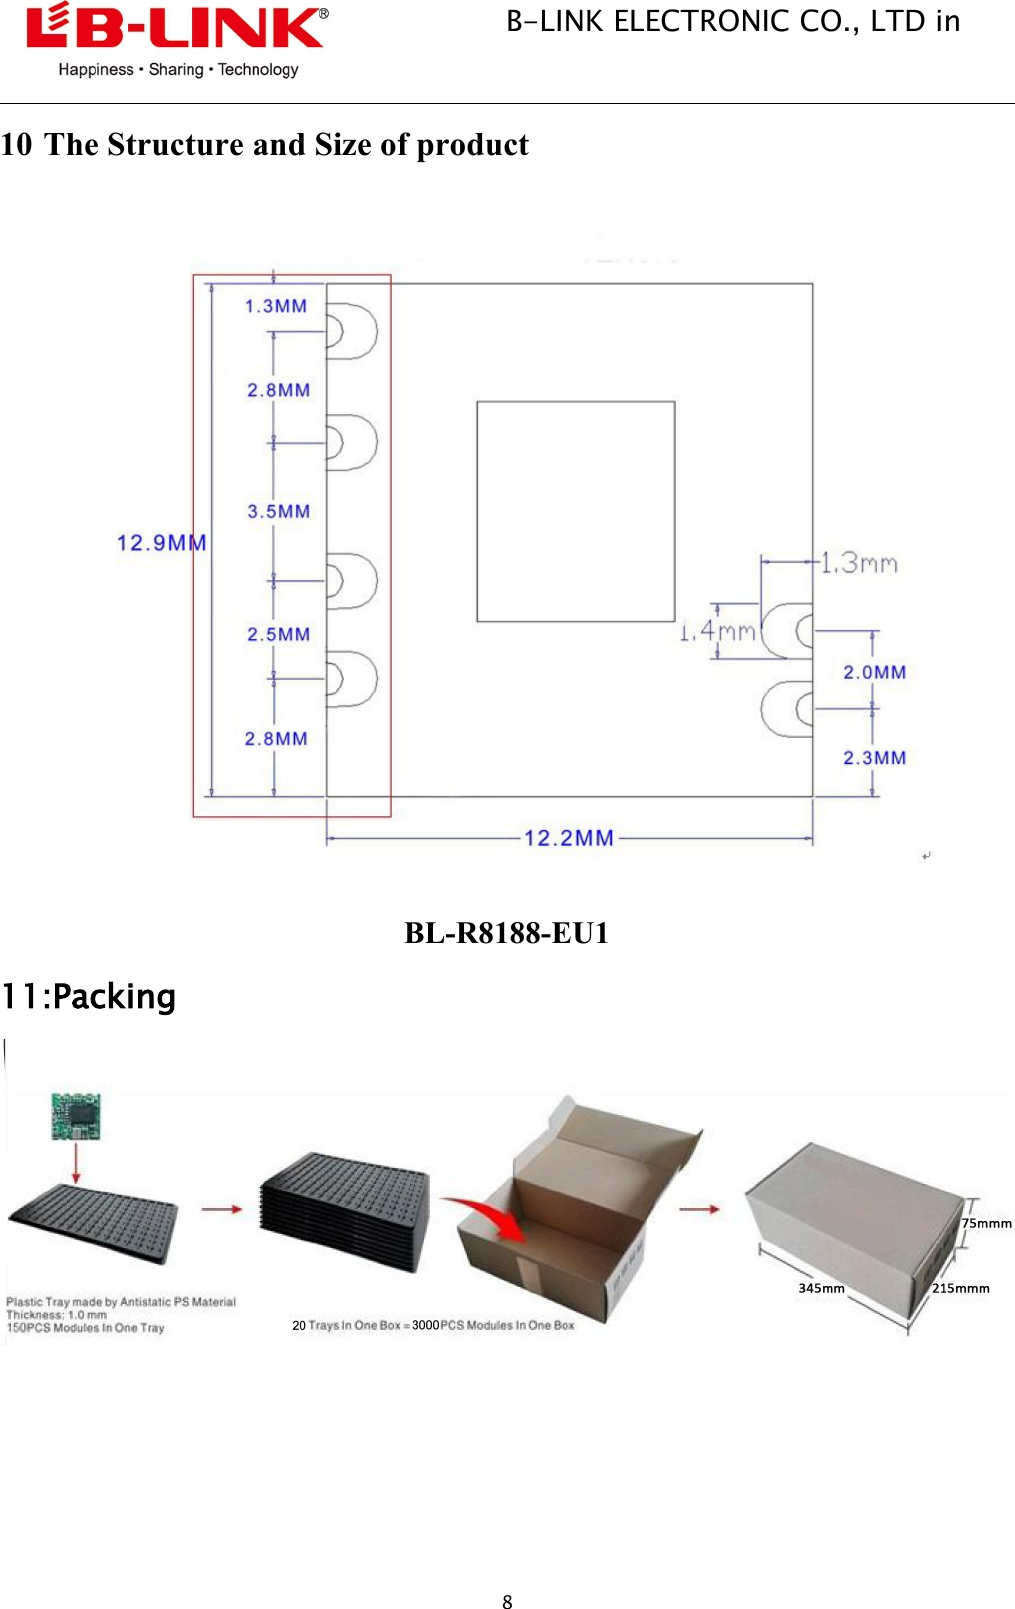 B-LINK ELECTRONIC CO., LTD in810 The Structure and Size of productBL-R8188-EU111:Packing